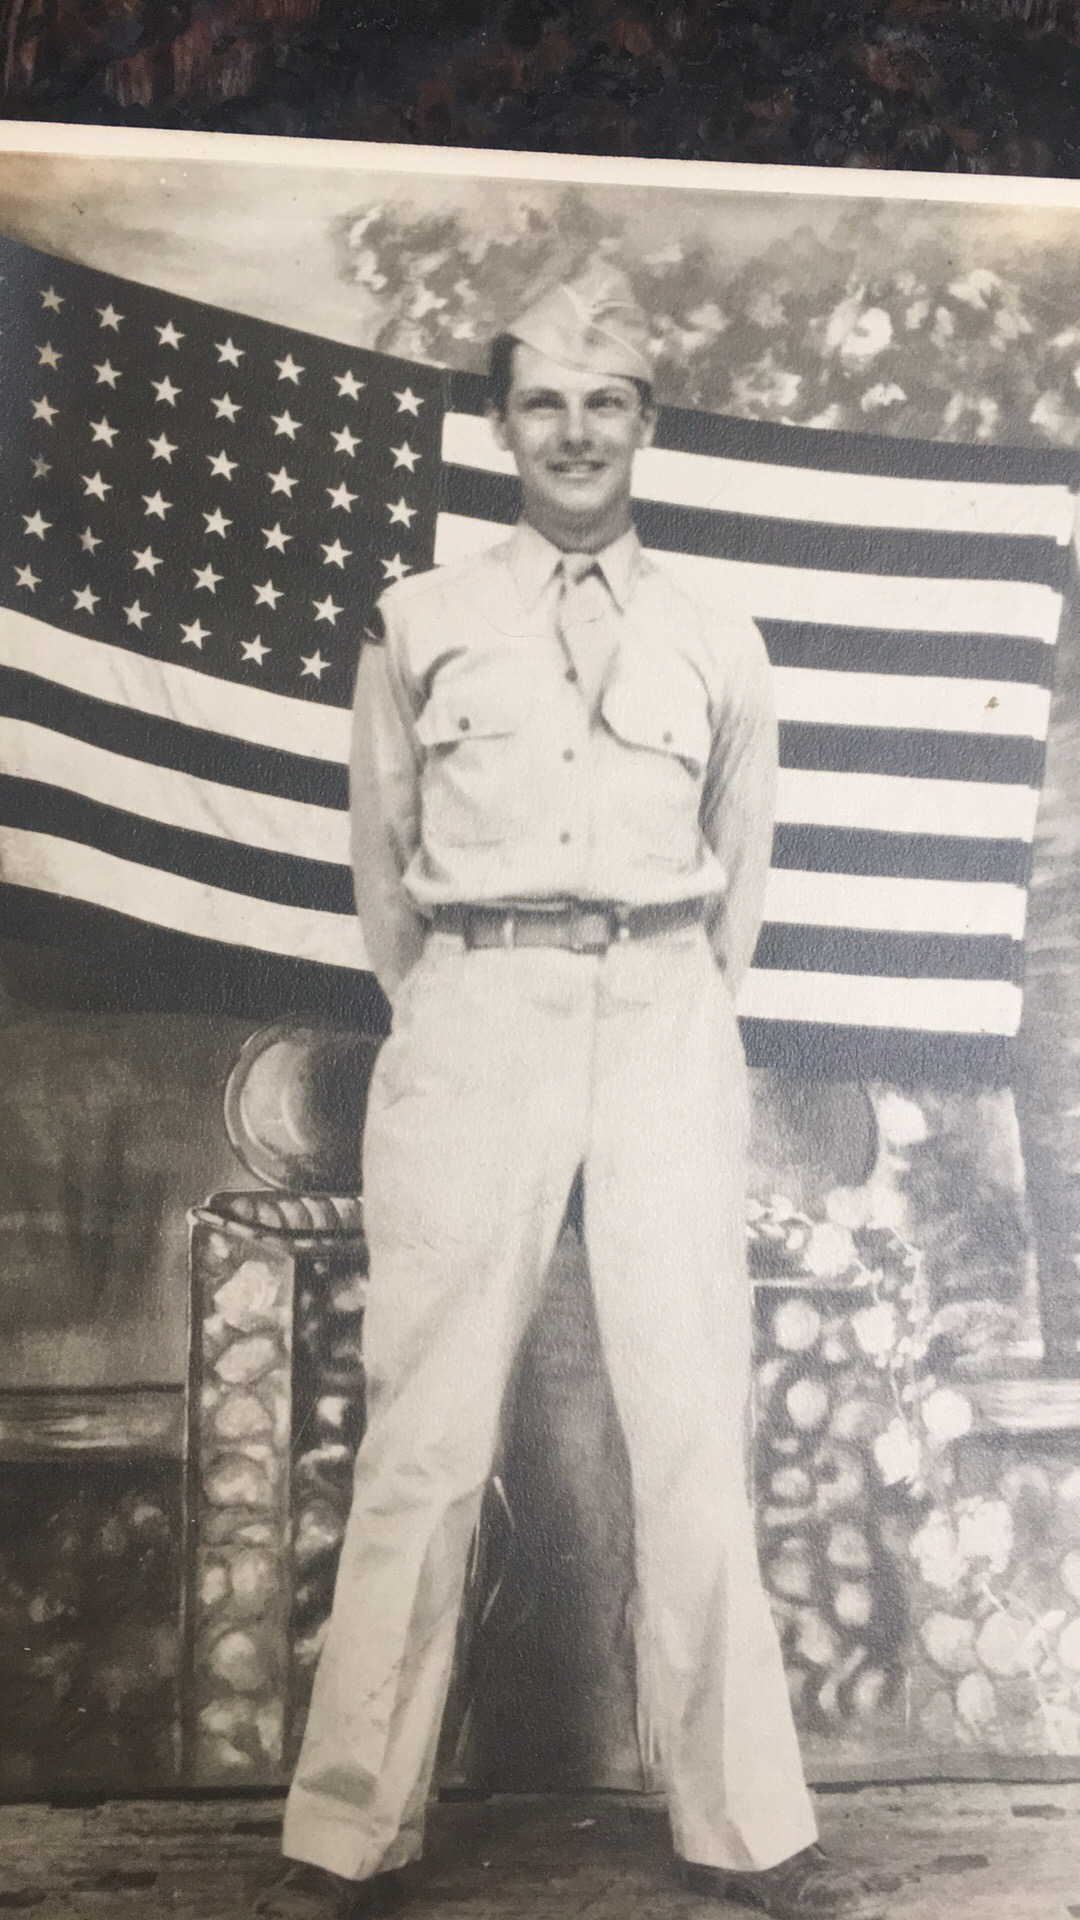 This is Laura's dad/Matt's grandfather that he never met. He was a number one gunner in WWII serving with the 157th Infantry, 45th Division. He received the Purple Heart with 2 oak leaf clusters.